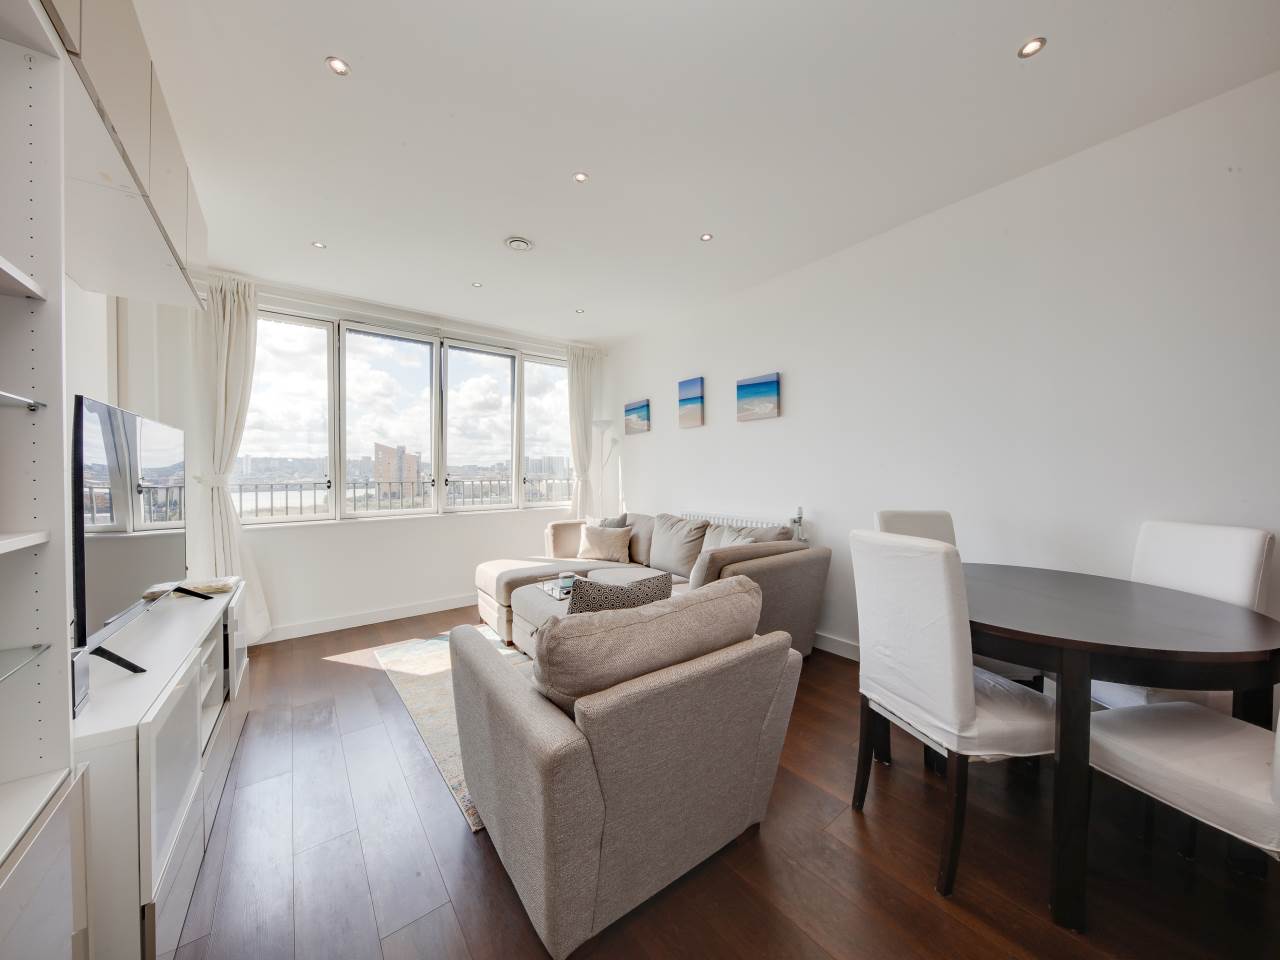 Lifestyle Property present this high specification one bedroom apartment, located in the Rendel Apartments, part of the new Royal Albert Wharf development, just moments from Gallions Reach DLR Station.A simply stunning, luxurious property with a high end finish, set next to the water offering marina and river views. The open plan lounge / kitchen is a great space, with wood flooring. There's four vertical windows facing the marina & River Thames for tranquil views and lots of natural light. Access to the fully decked balcony and winter garden via the full length glazed patio door. The fully fitted kitchen is simply beautiful, featuring soft-closing wall & base units and glazed charcoal splash back.Moving on to the bathroom, which features tiled walls and floor, large bathtub with Grohe thermostatically controlled mixer taps, shower attachment and clear glass shower screen. Vanity unit with storage and full width mirror above and a ladder style heated towel rail in a chrome finish.The bedroom is an excellent size with a cream carpet, built-in wardrobe with glazed/mirrored sliding doors. Access to the winter garden / balcony via two full length glazed patio doors.117 years remaining on lease
Annual Service charge: £2000.00
Annual ground rent: £300.00